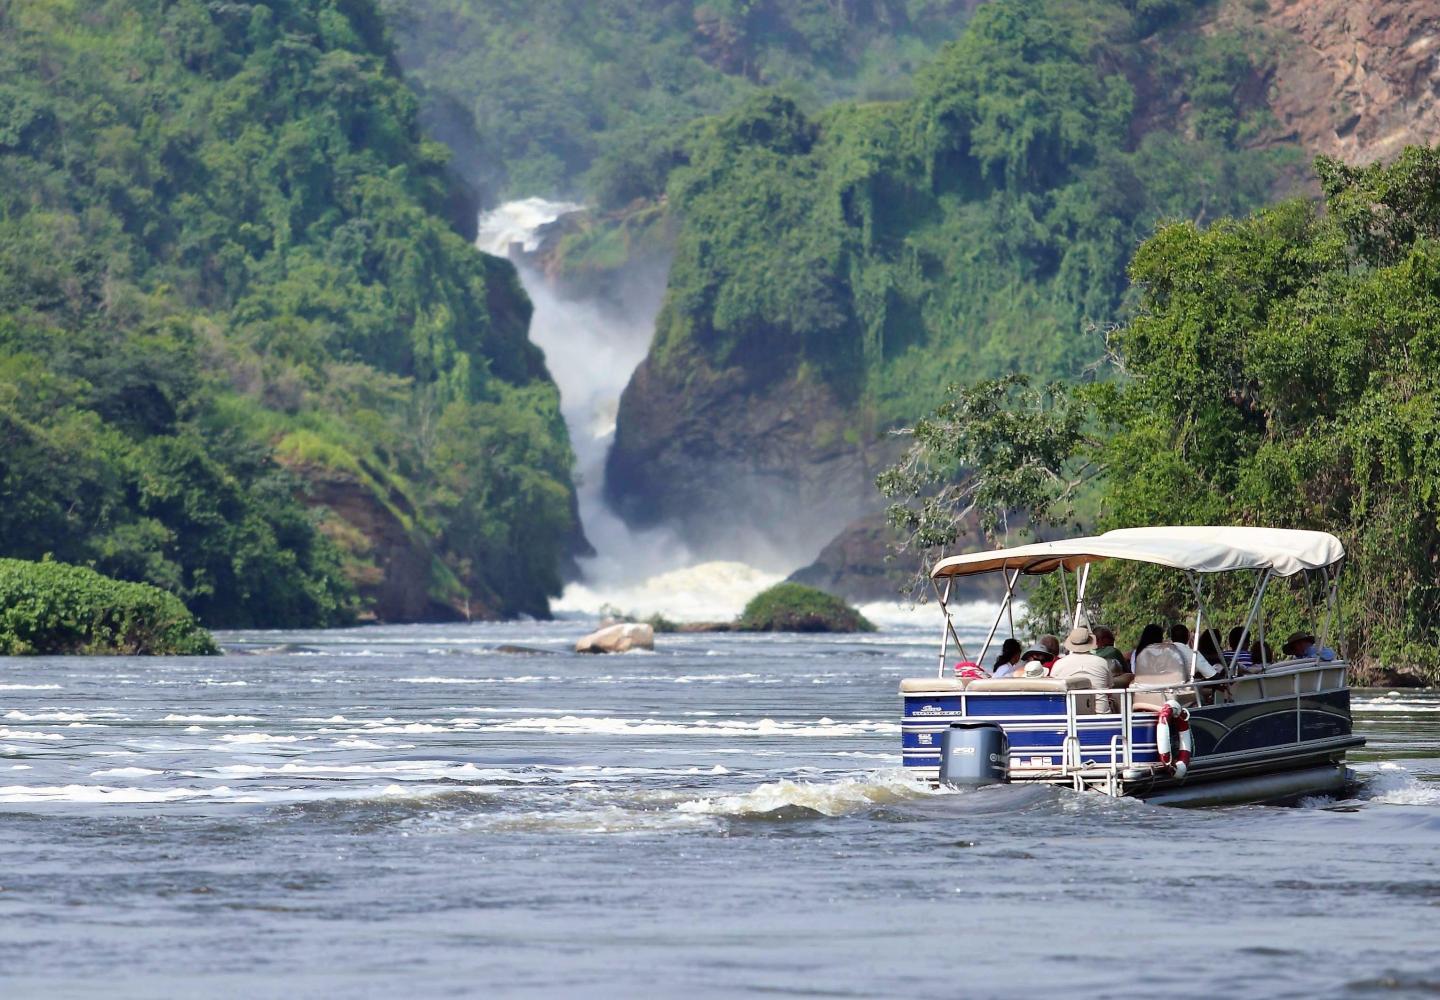 Boat trip on the Nile River up to Murchison Falls